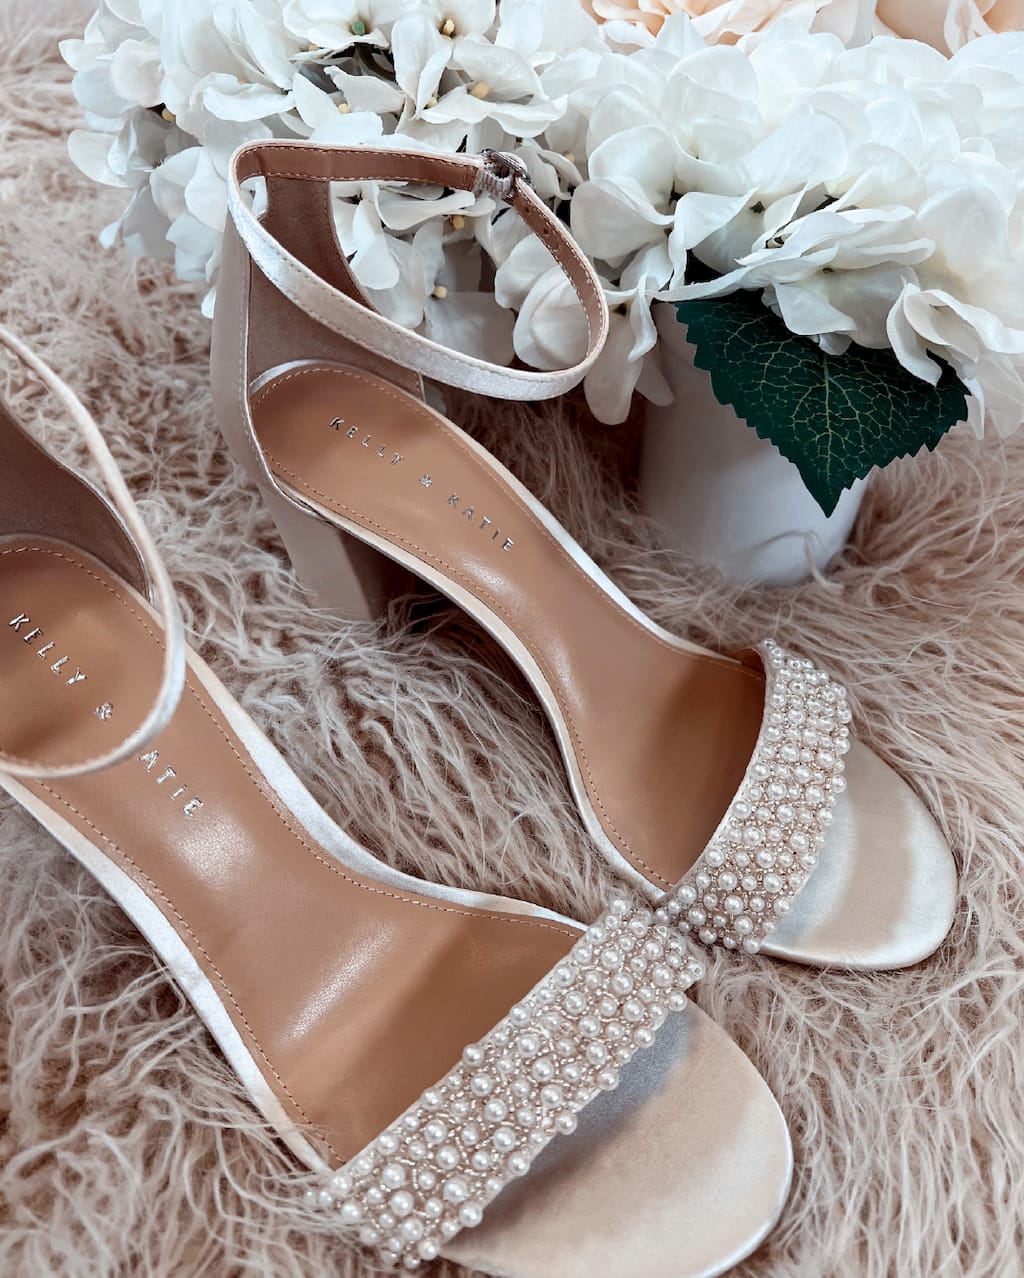 Ivory Wedding Heels With Golden T-strap and Peep Toe, Bridal Shoes in Retro  Style, Vintage Wedding Shoe With Block High Heel and Ankle Strap 